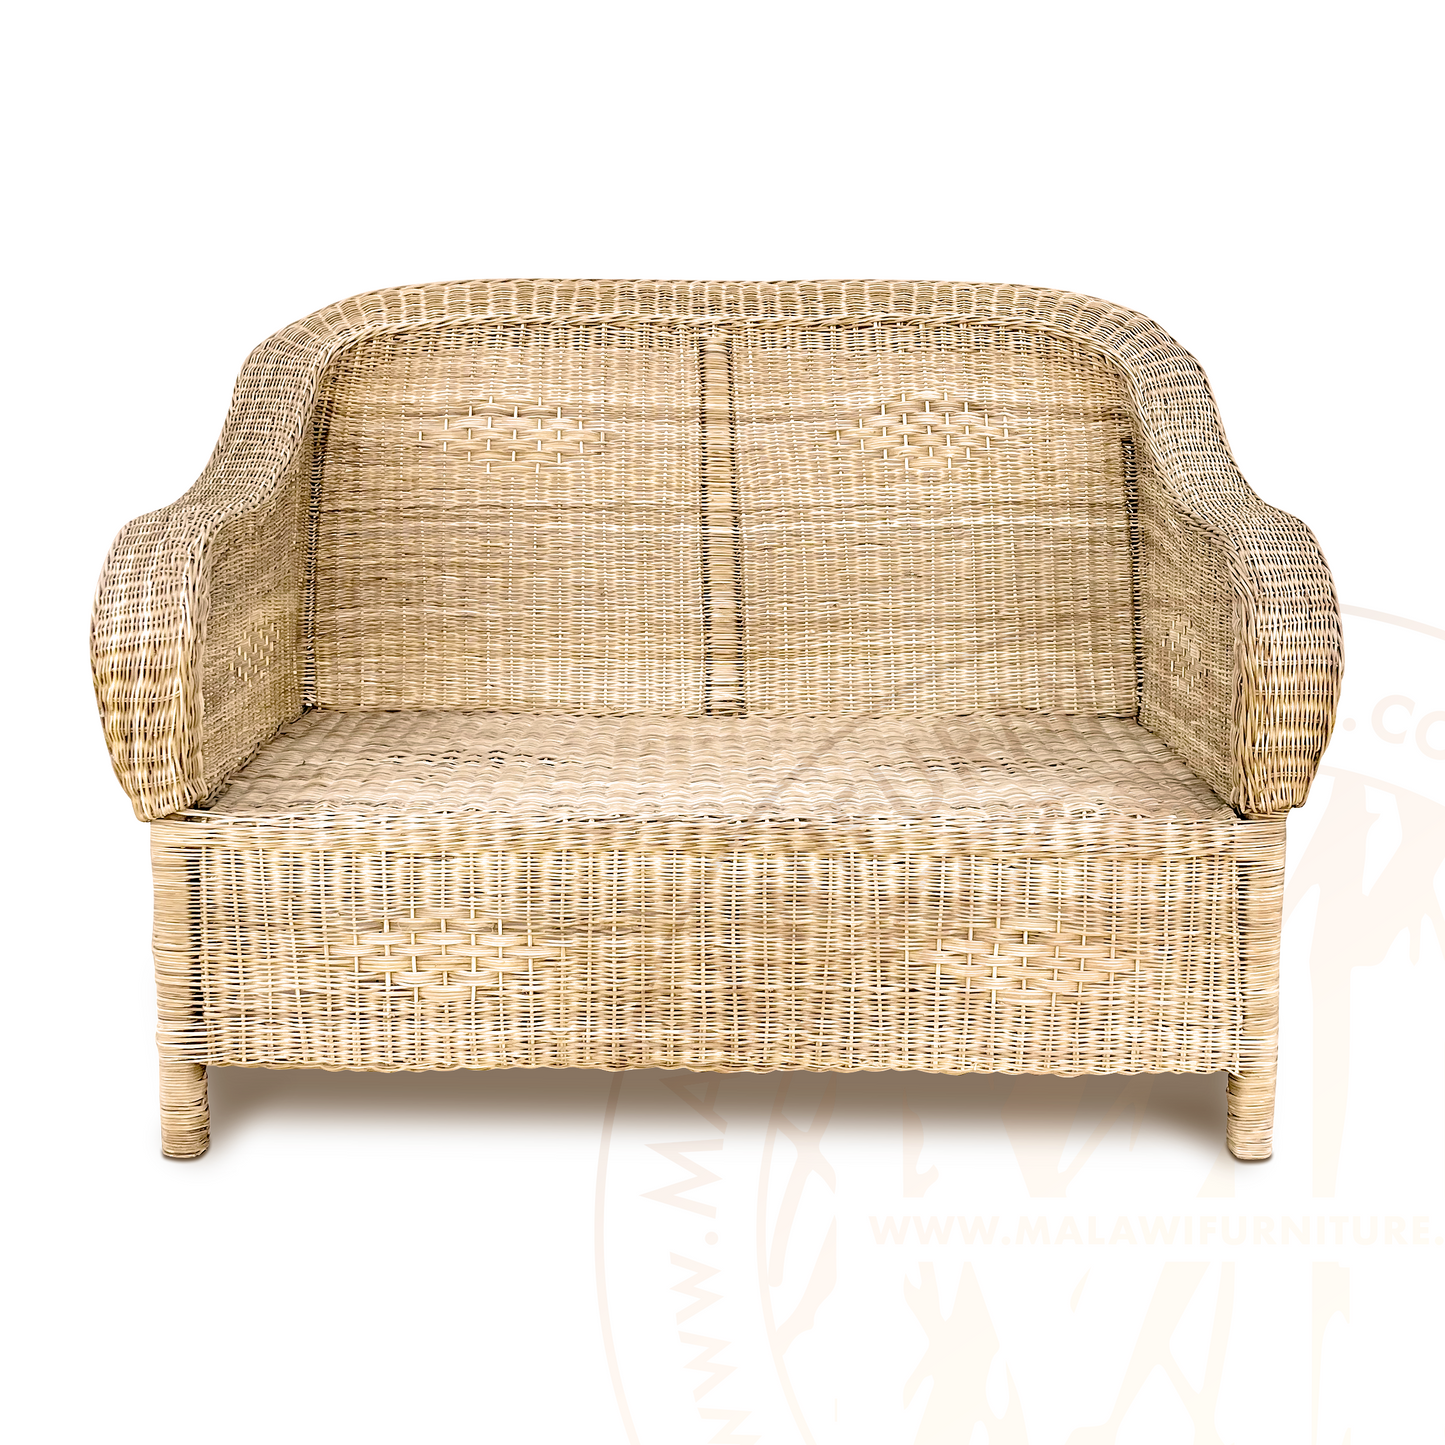 Classic Malawi Couch Set (3,2,1 Seater)